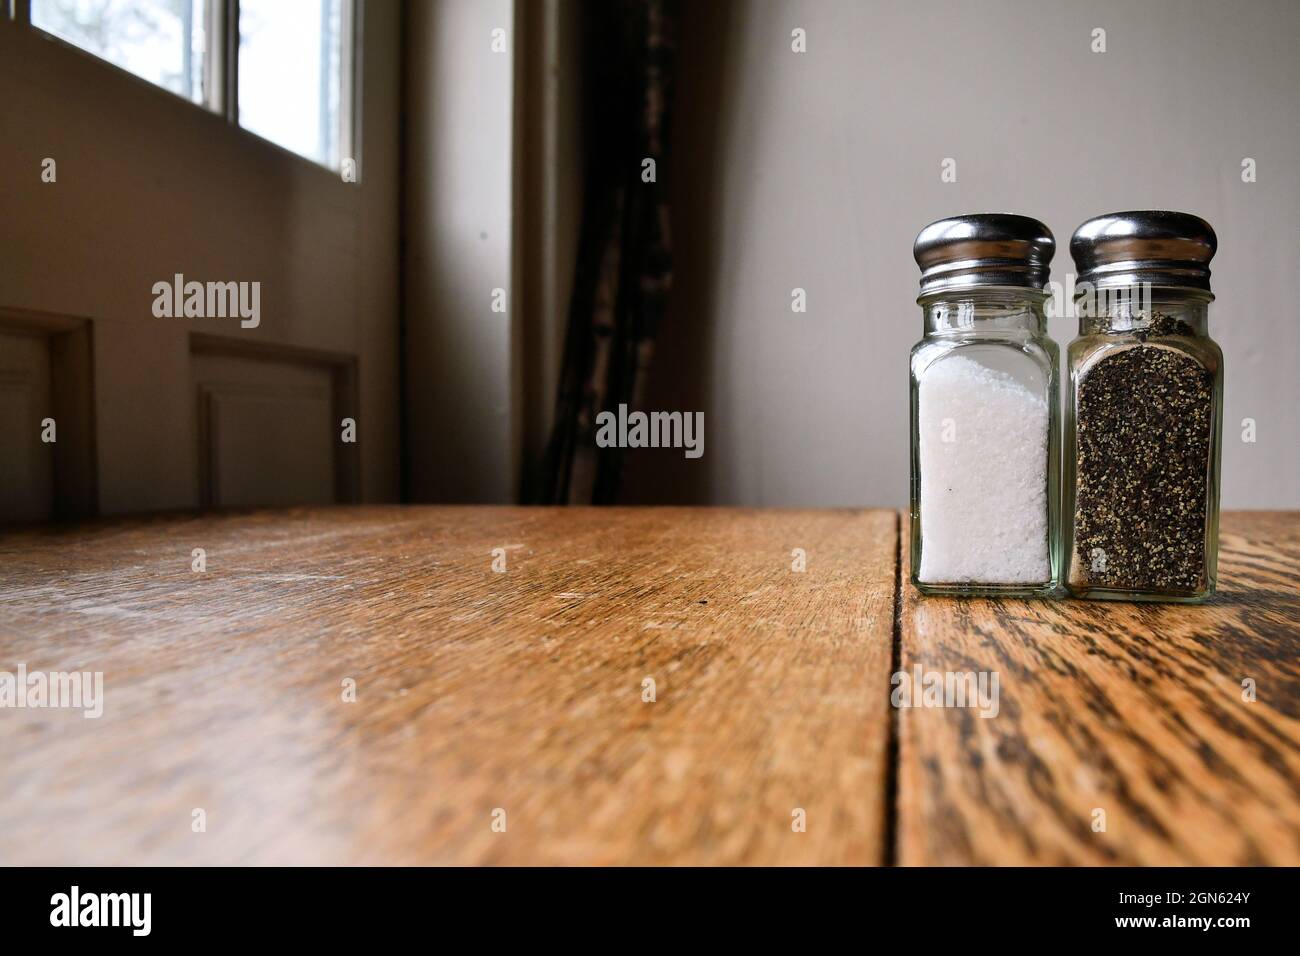 https://c8.alamy.com/comp/2GN624Y/ground-salt-and-pepper-shakers-on-a-polished-wood-surface-with-light-from-a-window-illuminating-the-table-rustic-dining-table-with-glass-shakers-2GN624Y.jpg